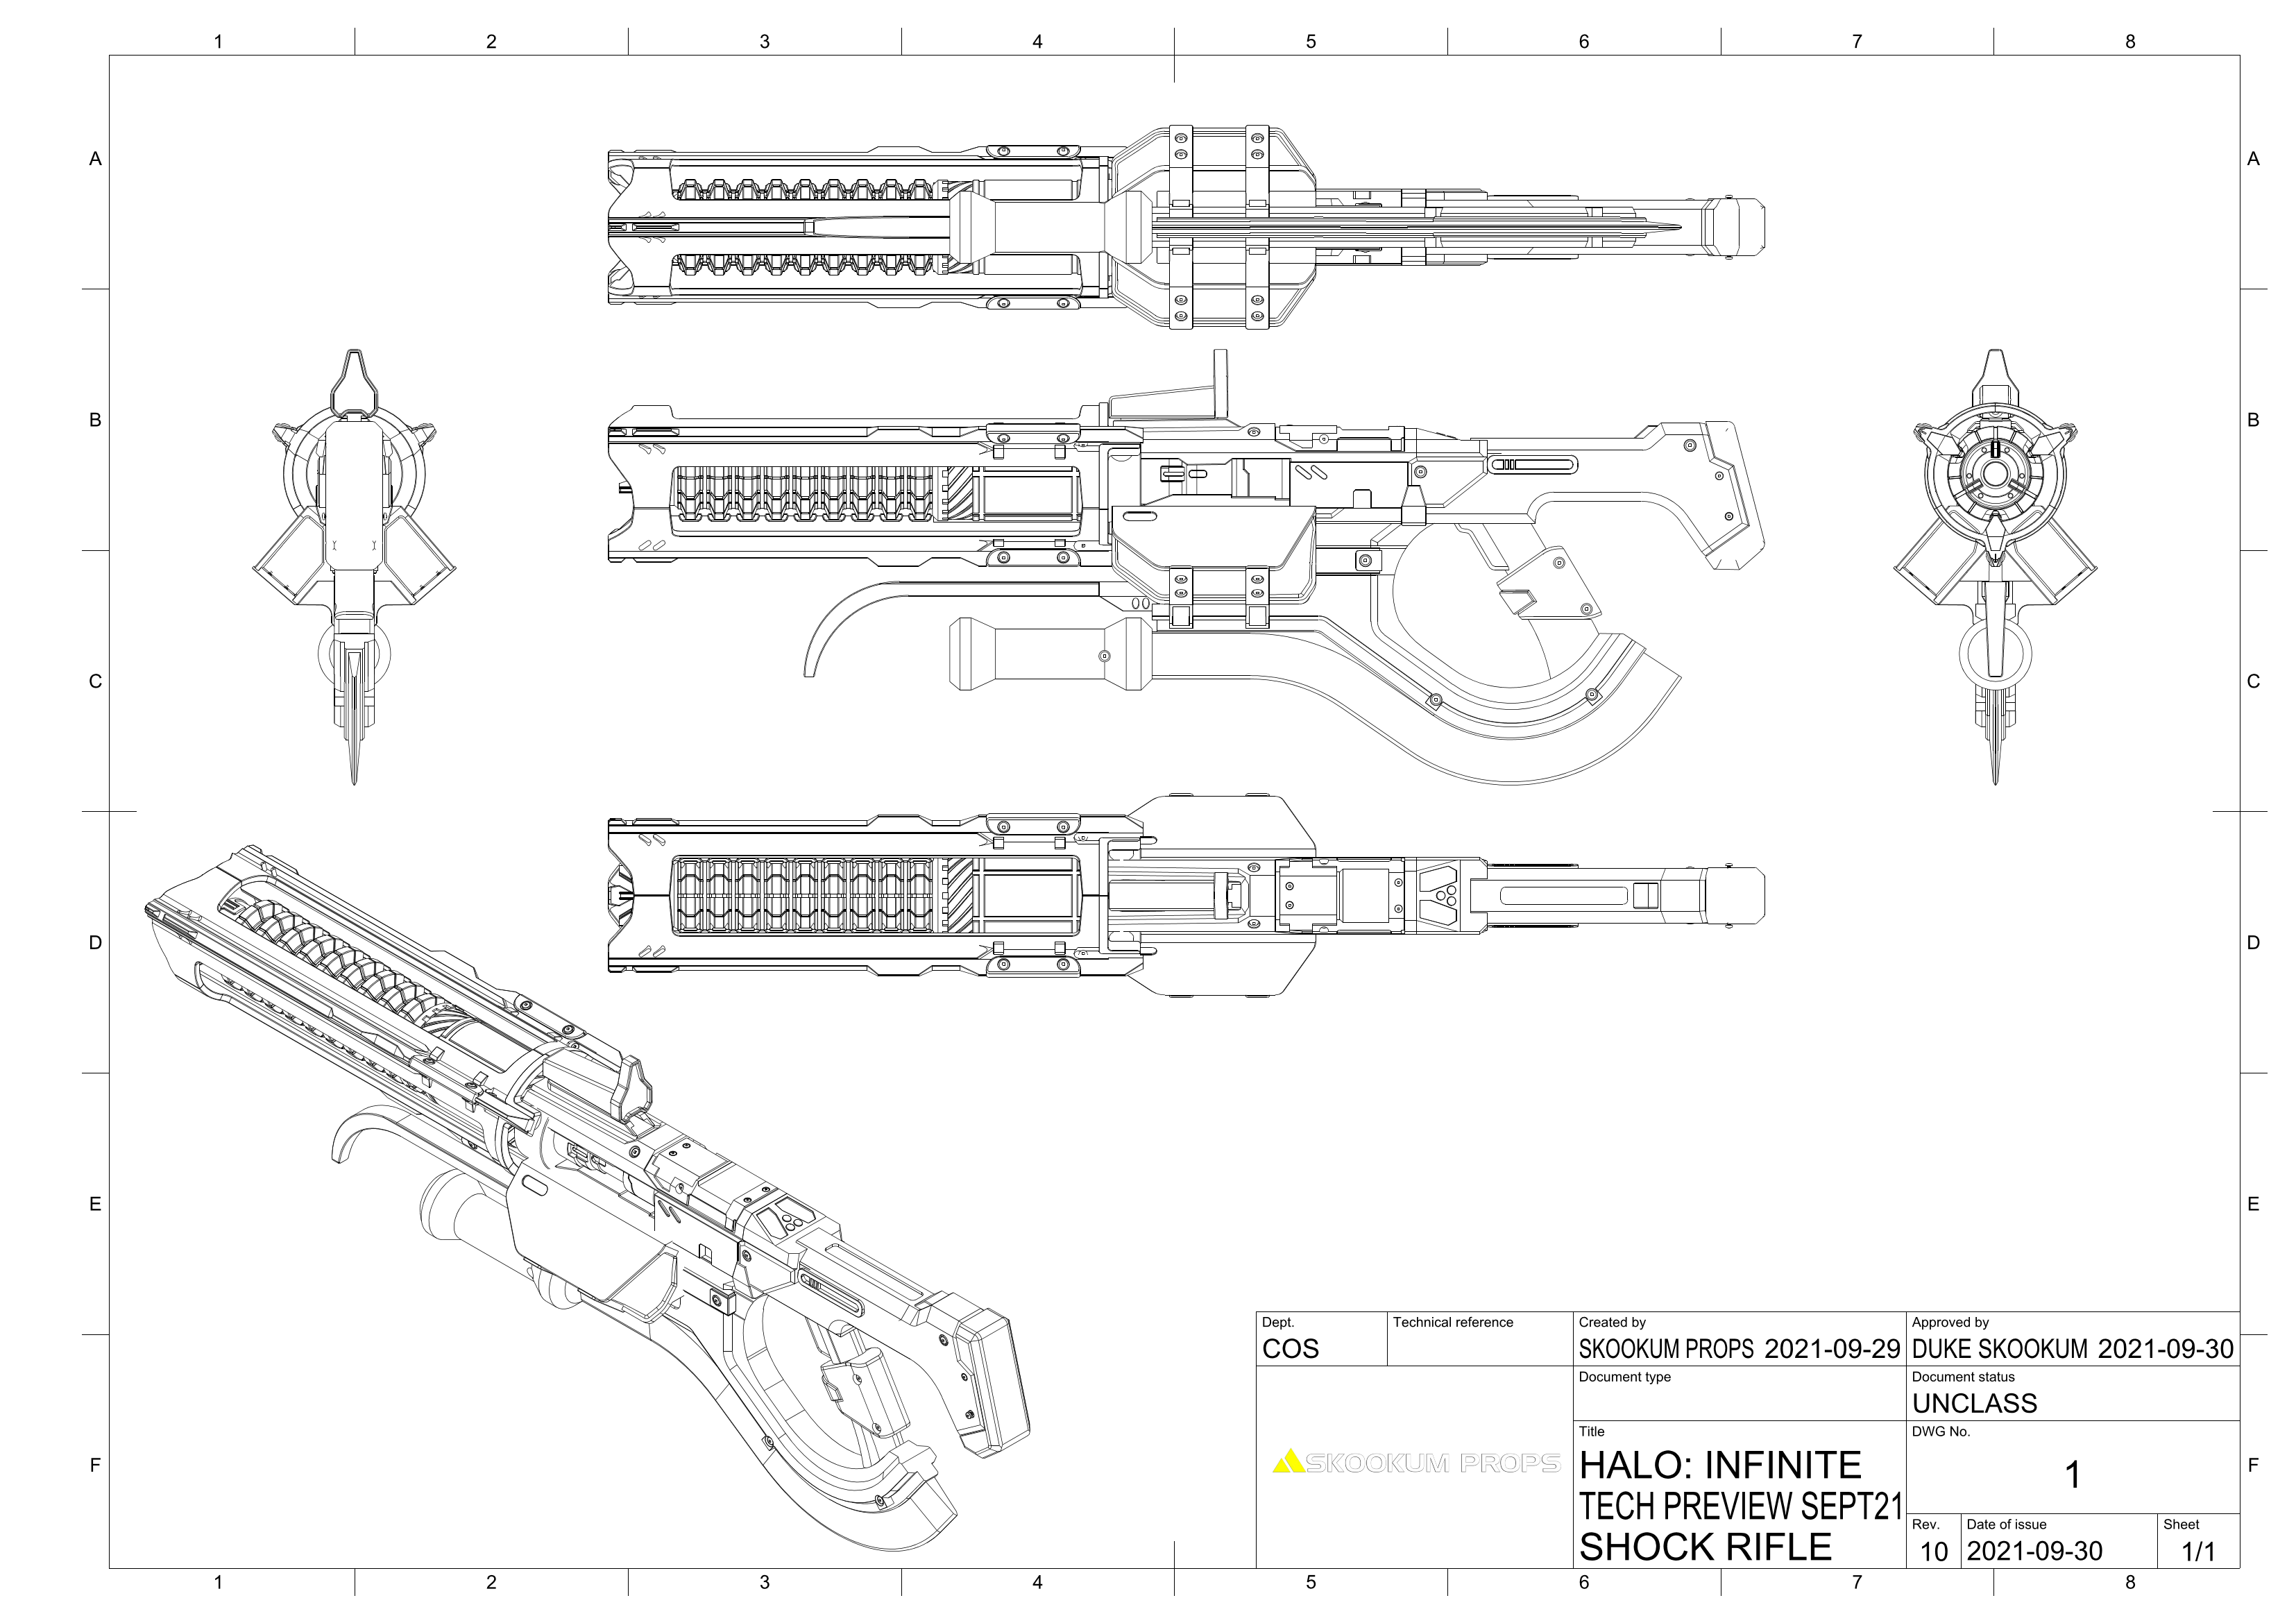 Shock Rifle Drawing v1_Page_1.png